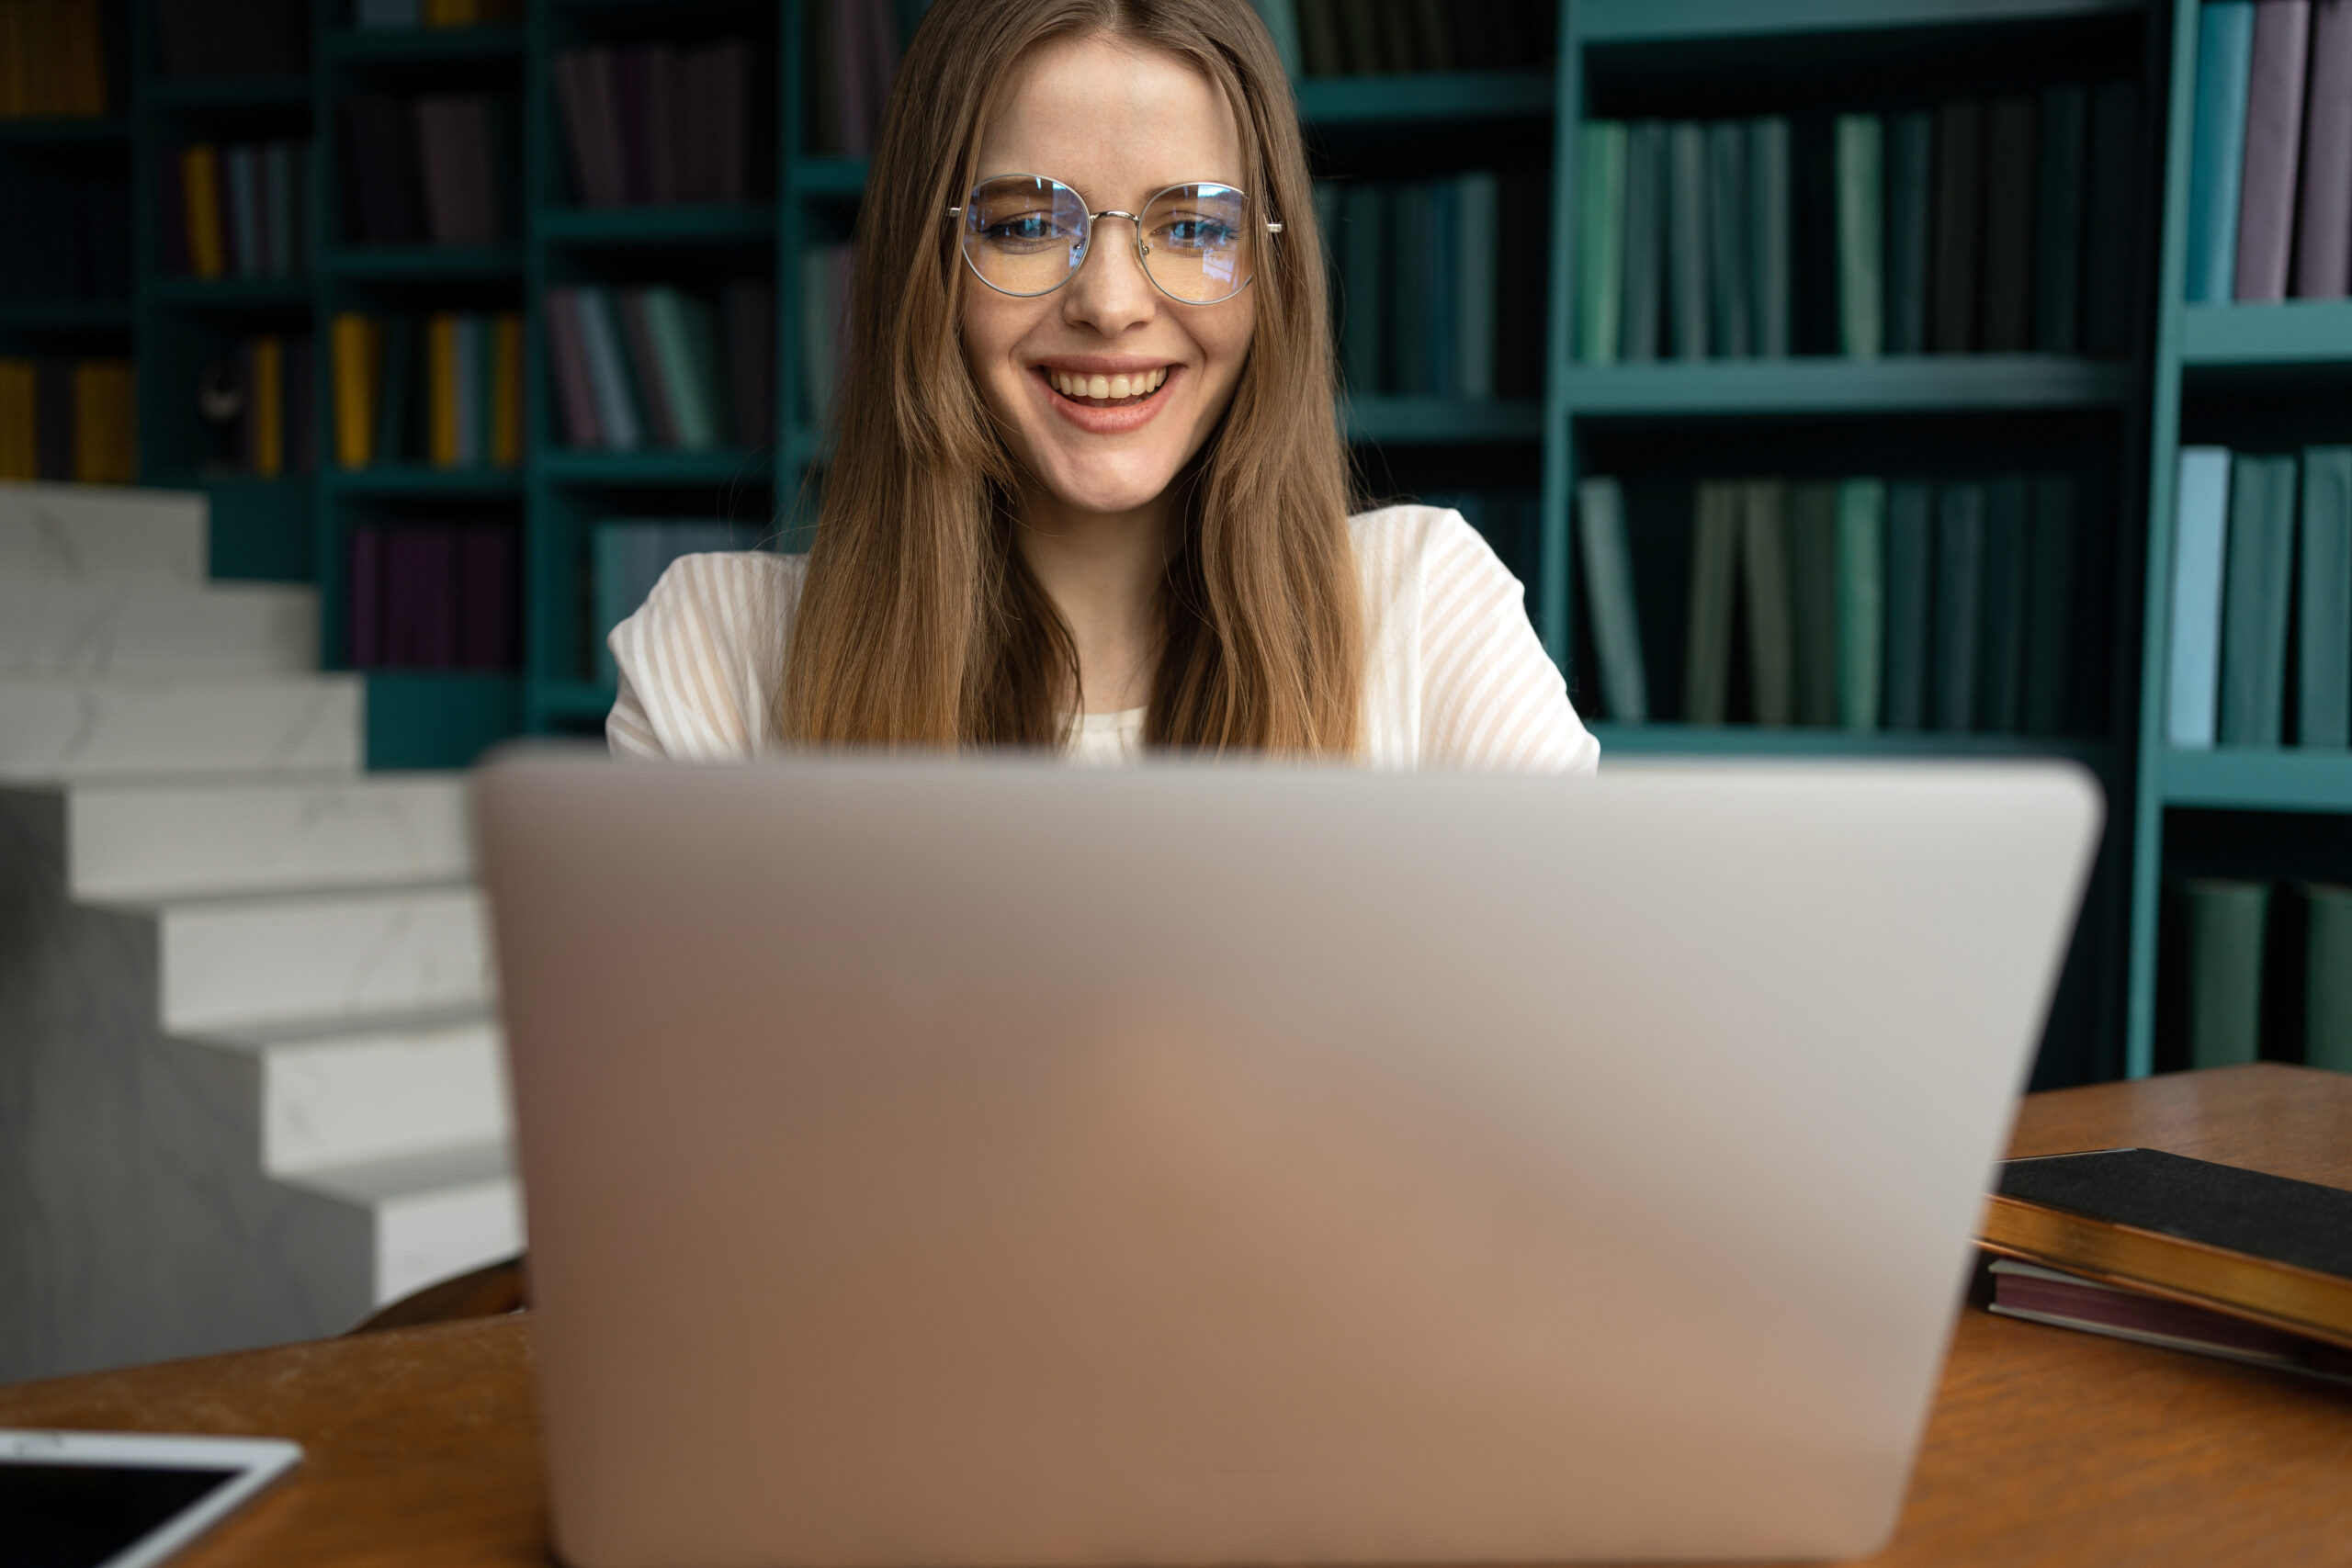 A female student with glasses studying in the library with her laptop